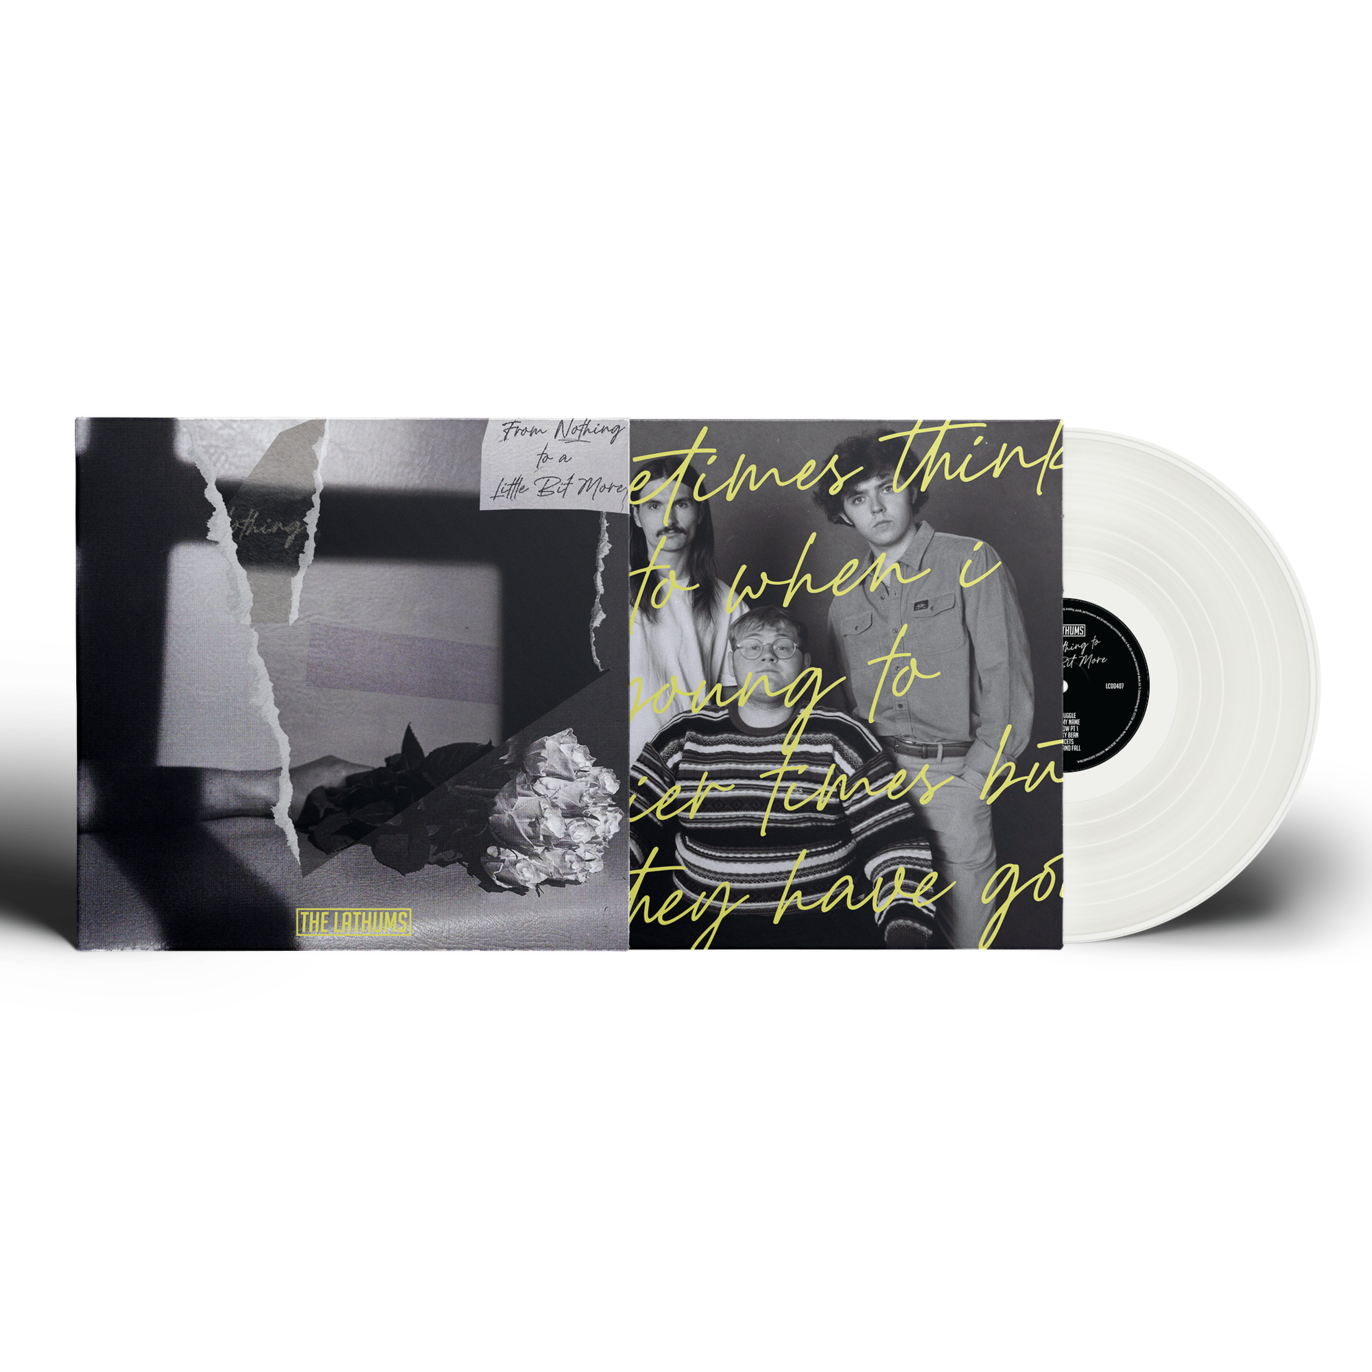 The Lathums - From Nothing To A Little Bit More: LTD Edition Alt Art White LP